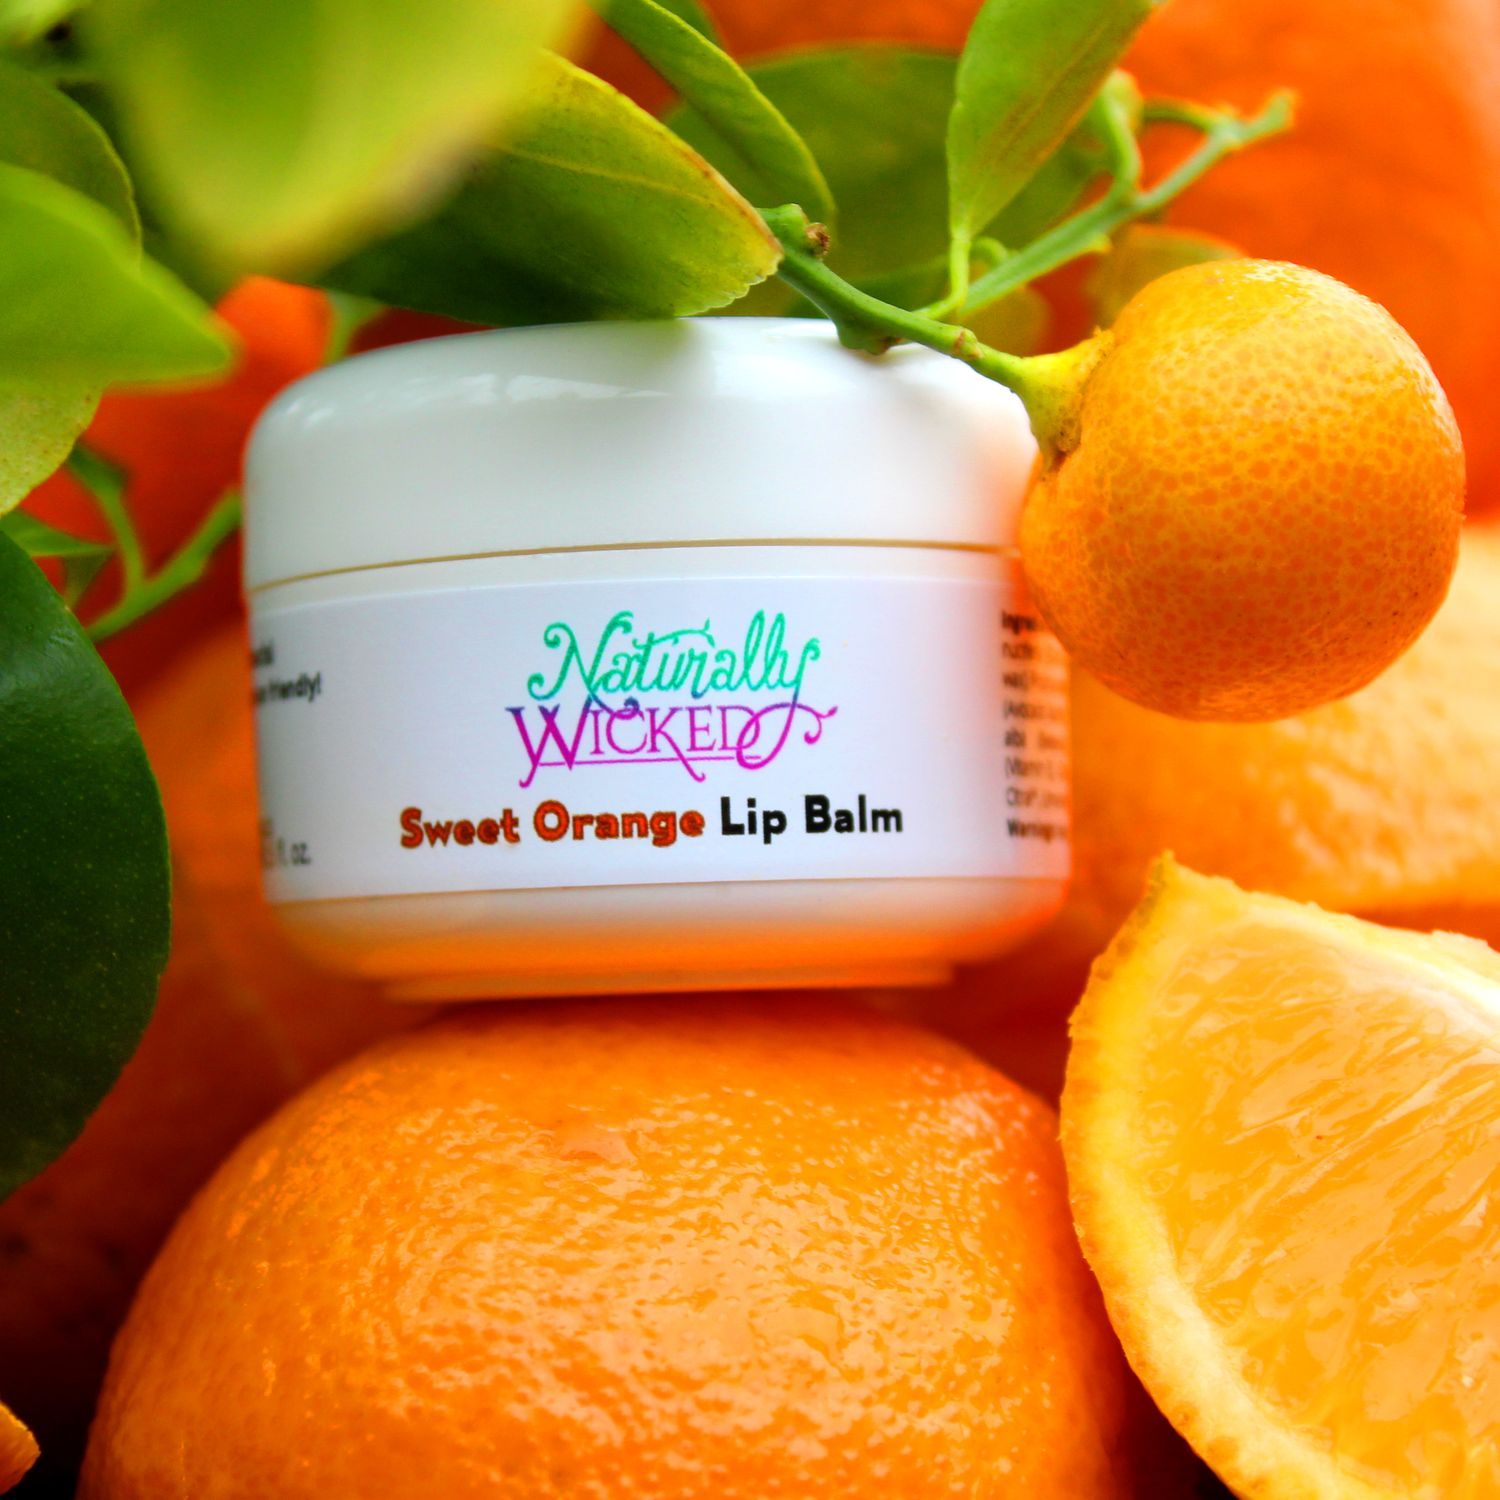 Naturally Wicked Sweet Orange Lip Balm Surrounded By Oranges & Orange Tree With Green Leaves